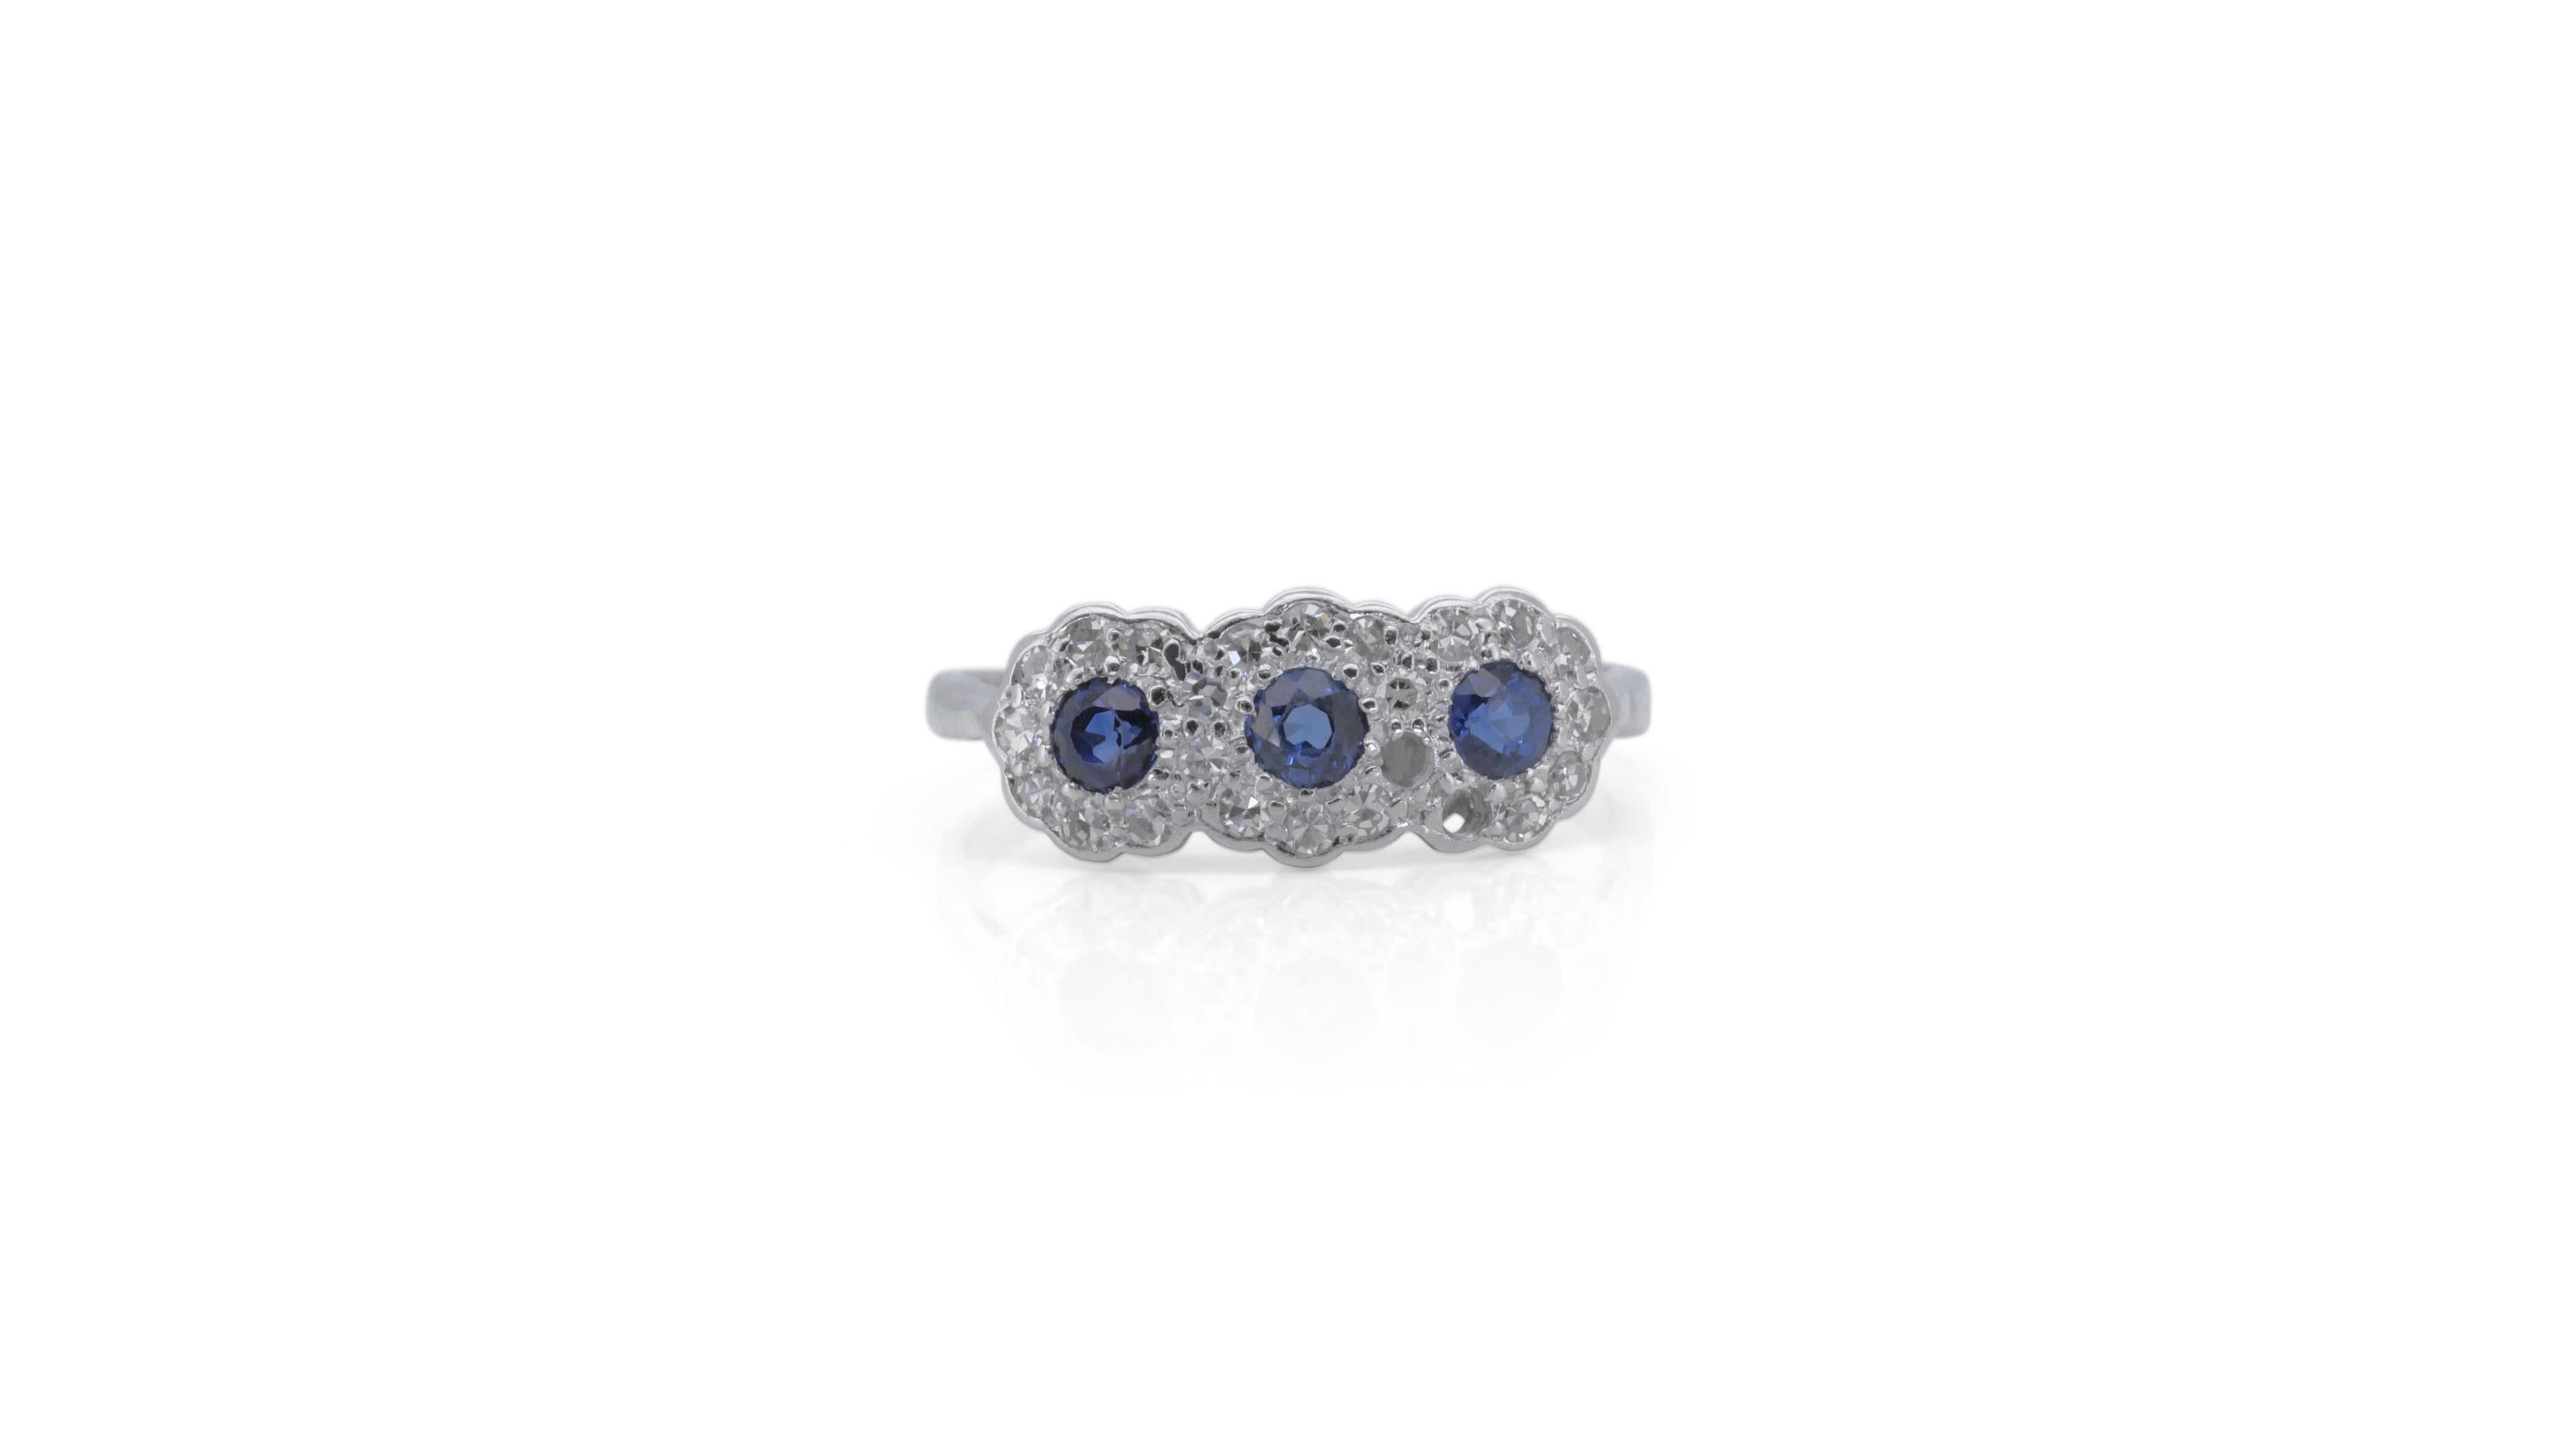 A beautiful cluster ring with a dazzling 0.3 carat Natural Sapphire. It has 0.2 carat of side diamonds which add more to its elegance. The jewelry is made of Platinum with a high quality polish. It comes with NGI certificate and a fancy jewelry